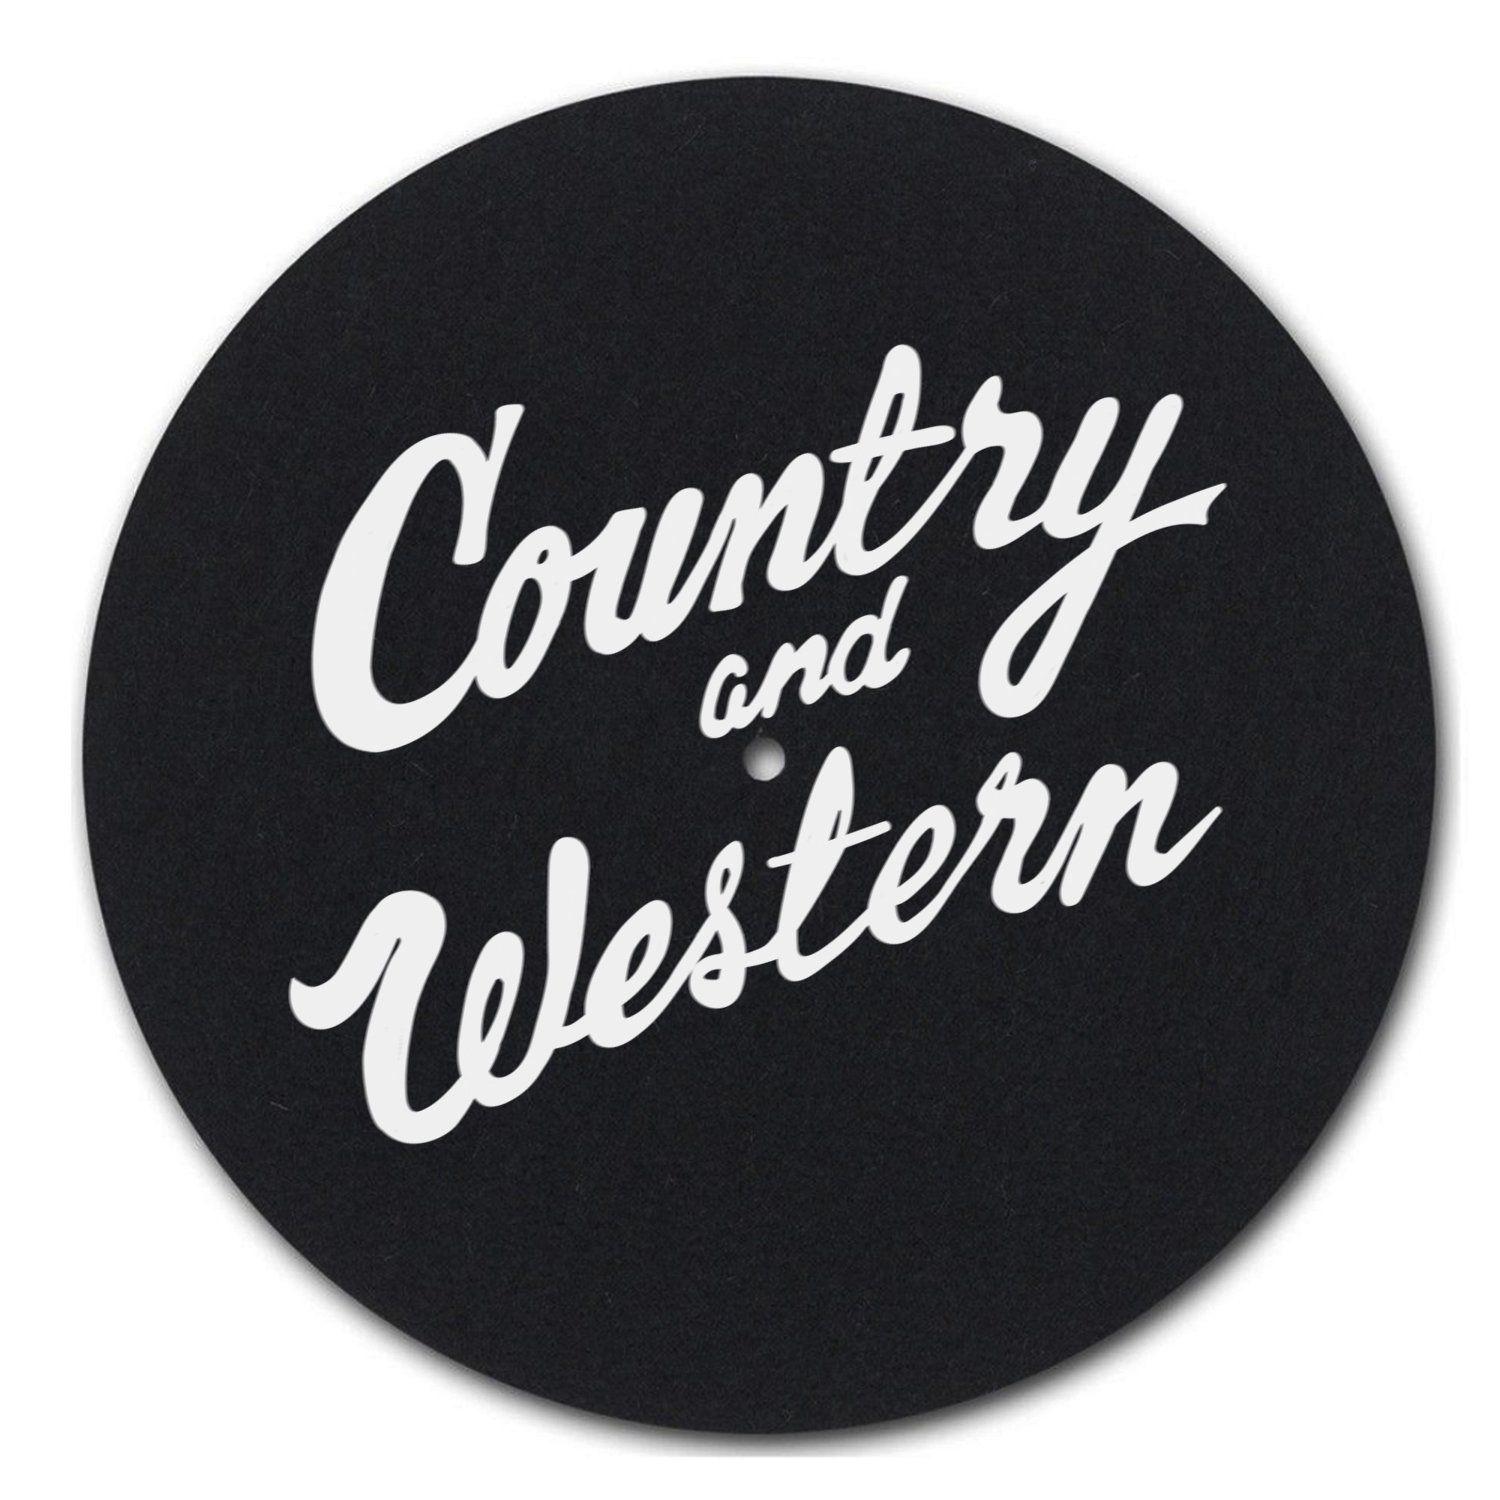 Country Western Logo - Country & Western Black Felt Slipmat w/ FREE country record